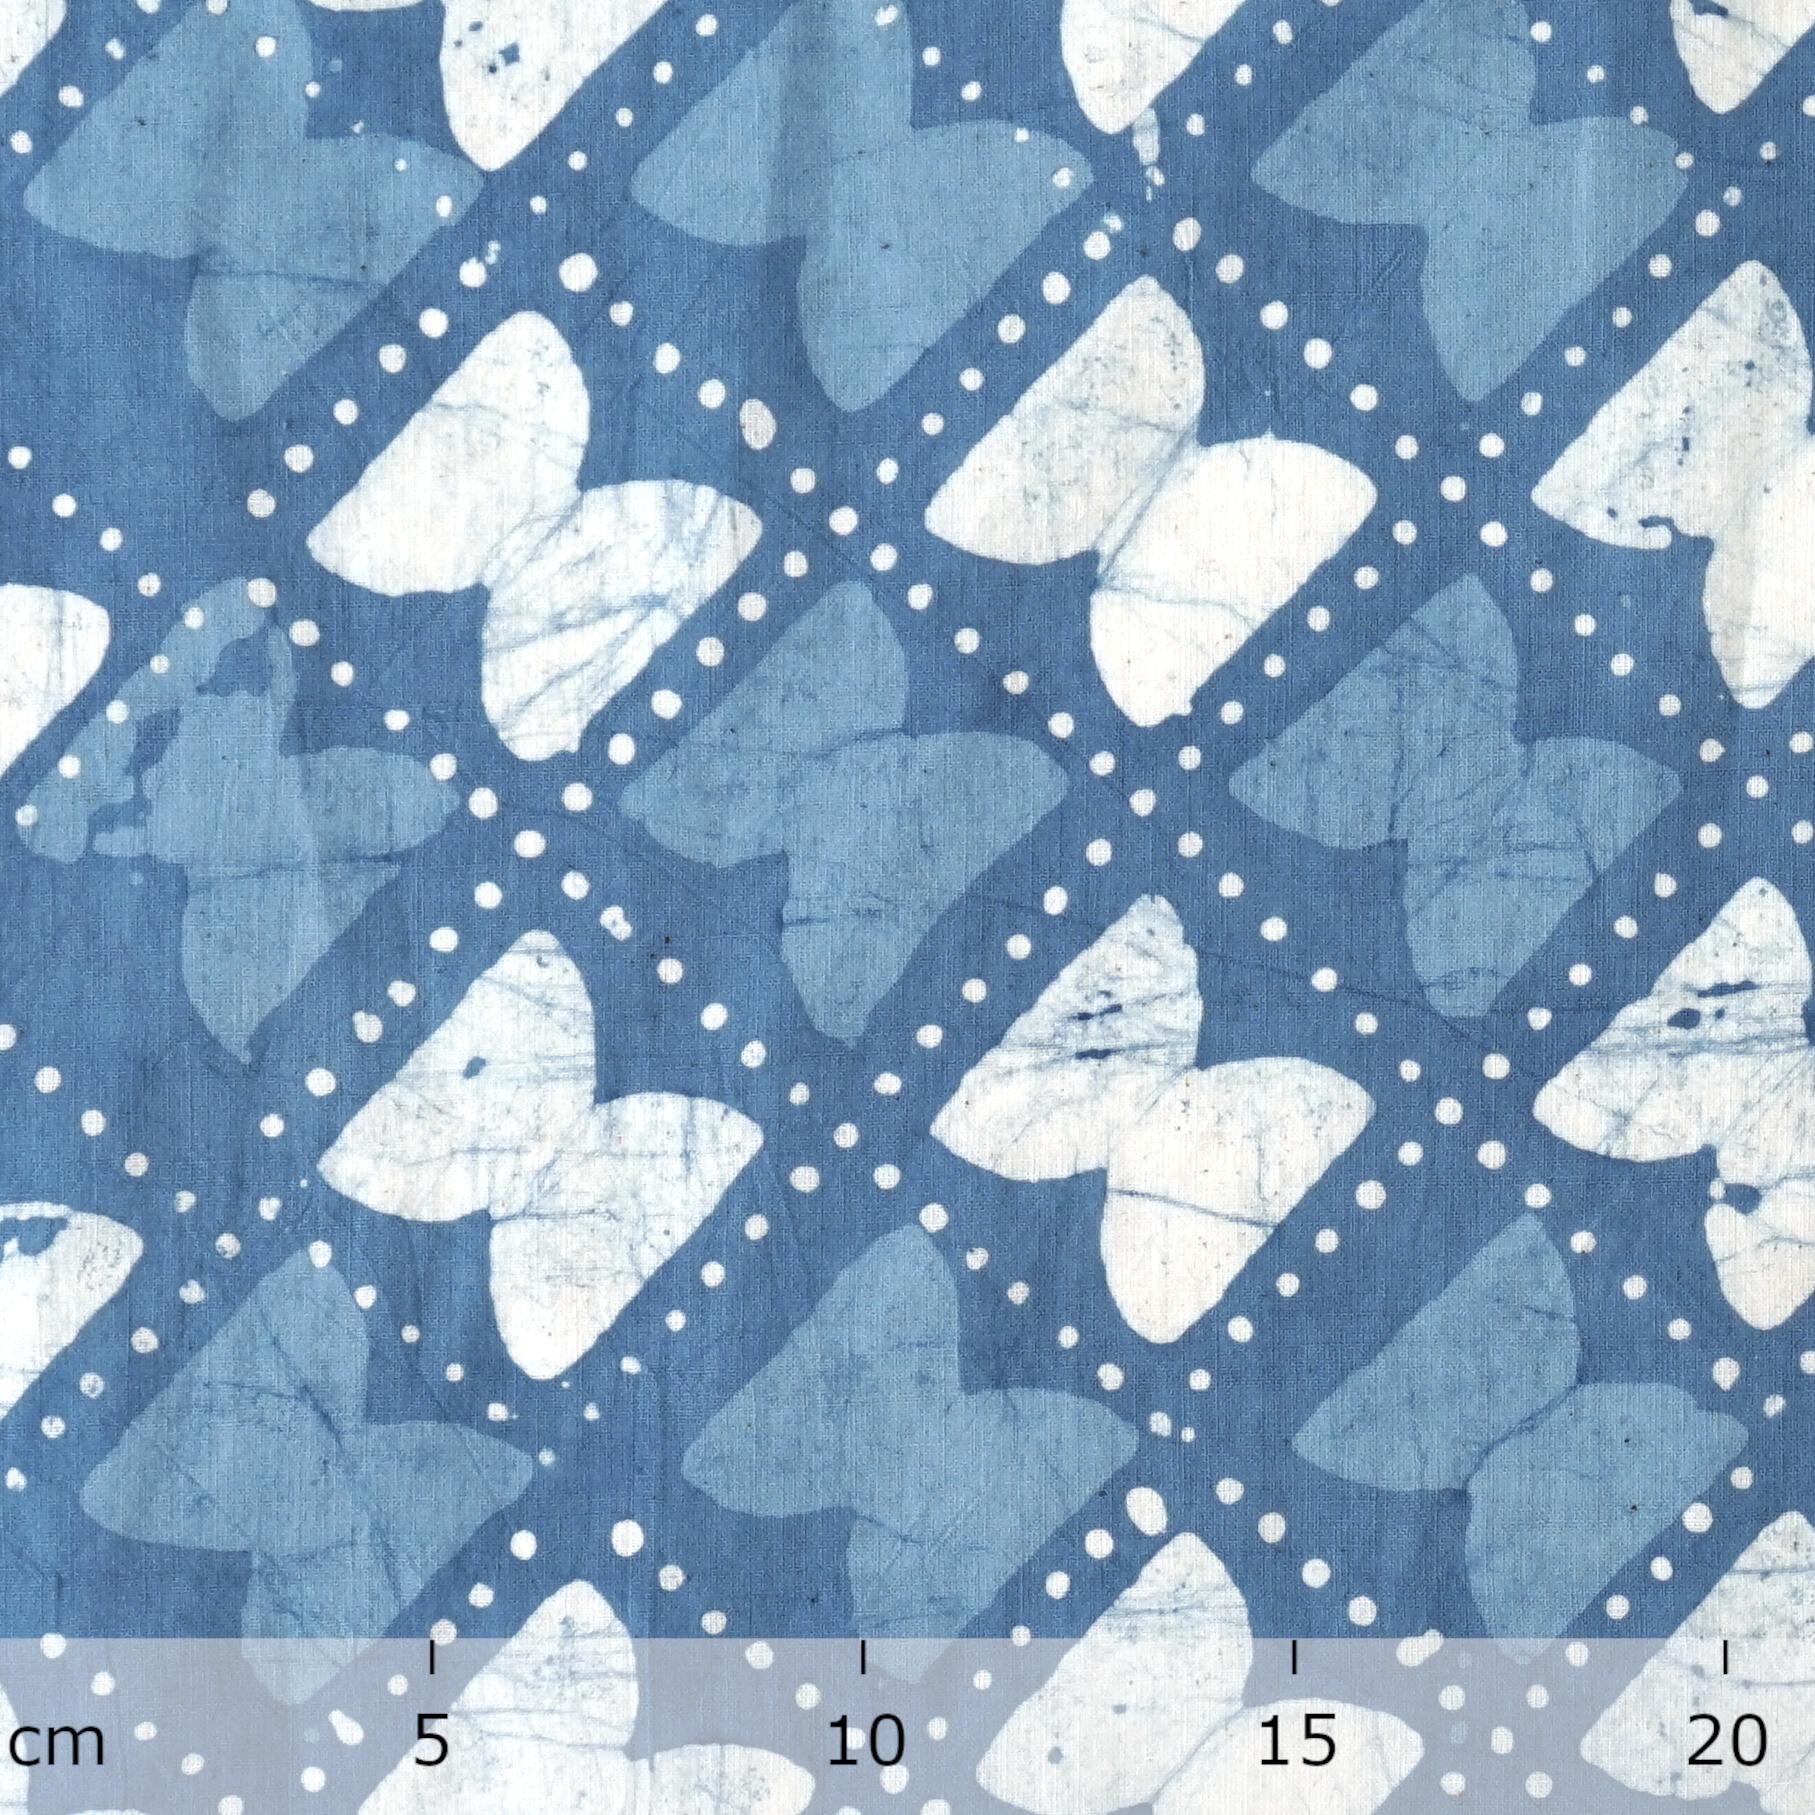 100% Block-Printed Batik Cotton Fabric From India - Blue Reactive Dye - Stamped & Sealed - Ruler